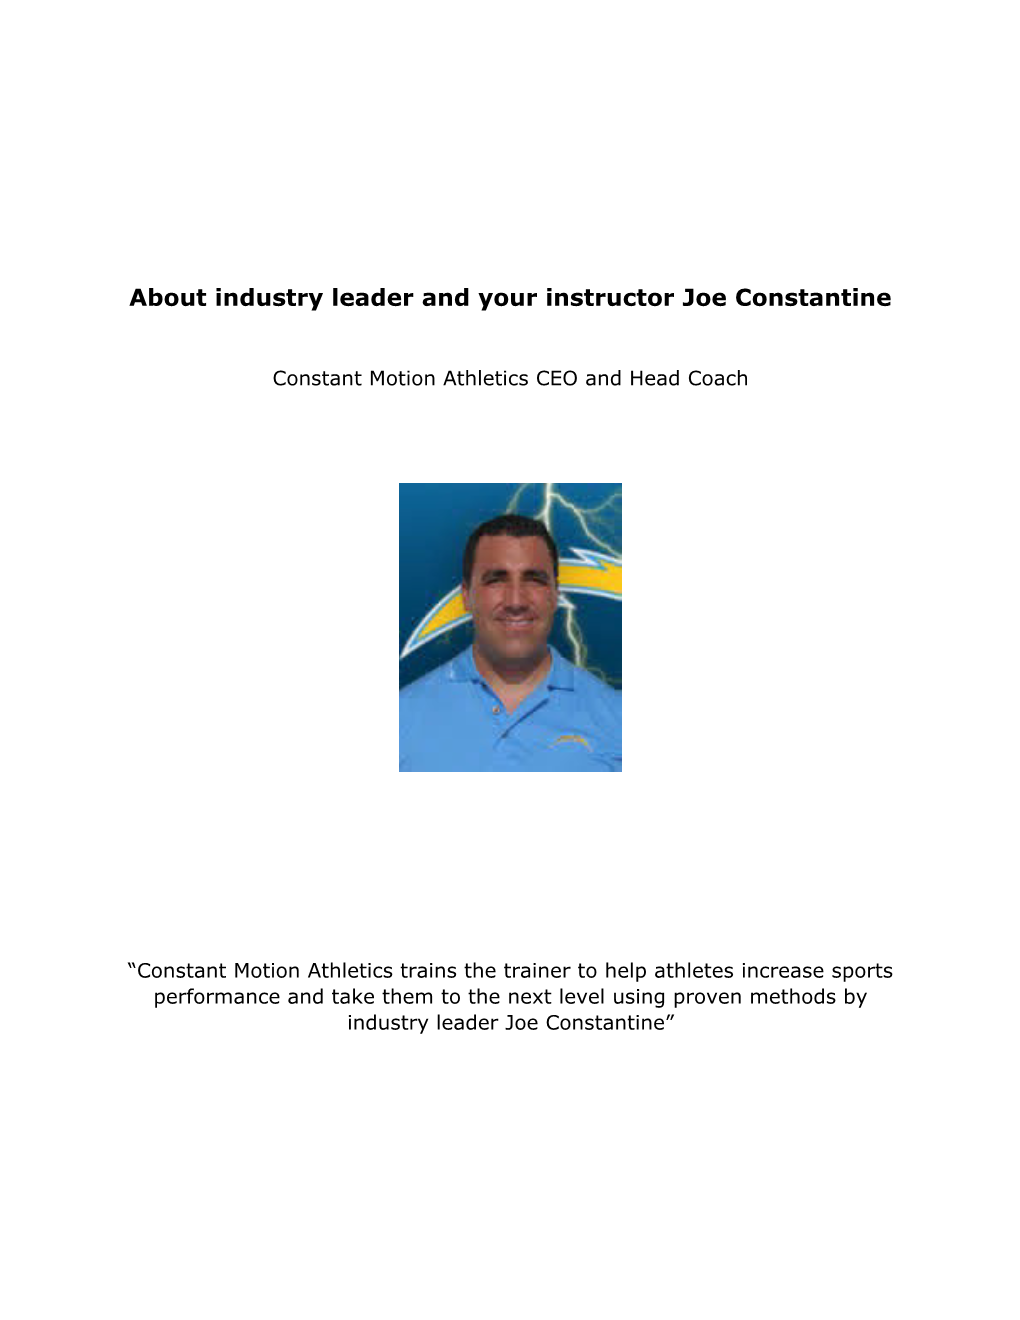 About Industry Leader and Your Instructor Joe Constantine